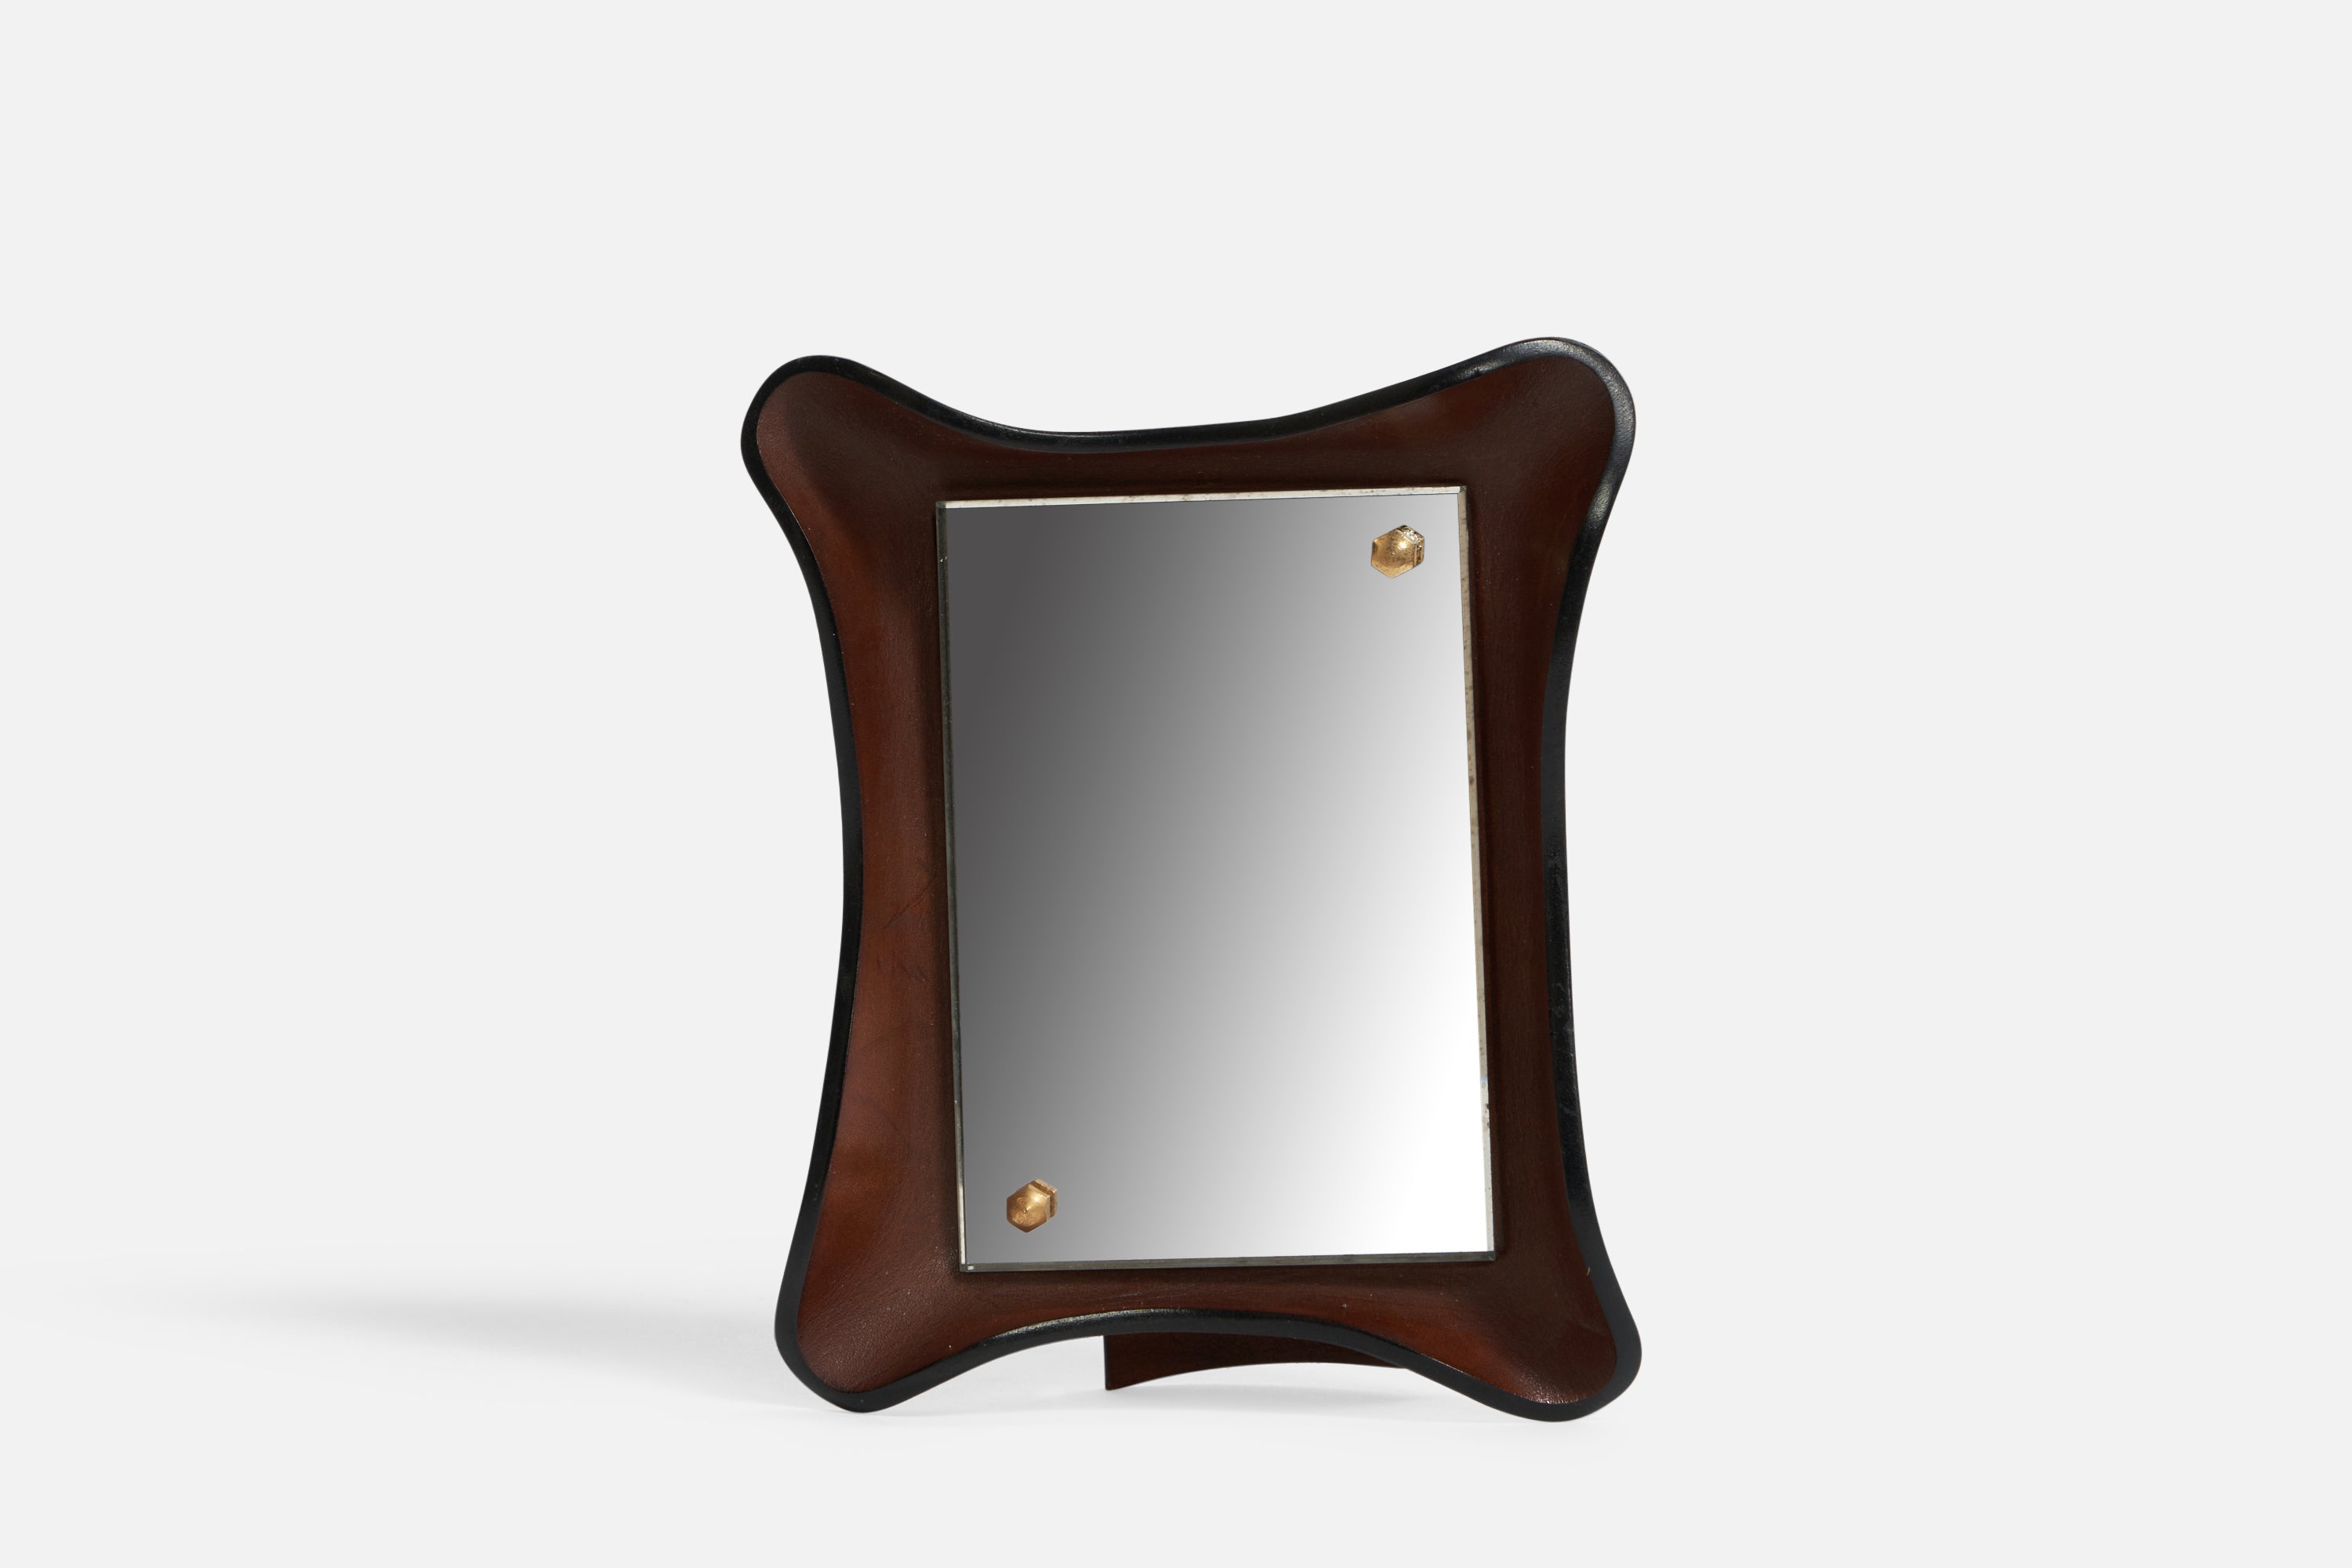 A wet-moulded leather and brass table mirror designed and produced in Italy, c. 1960s.